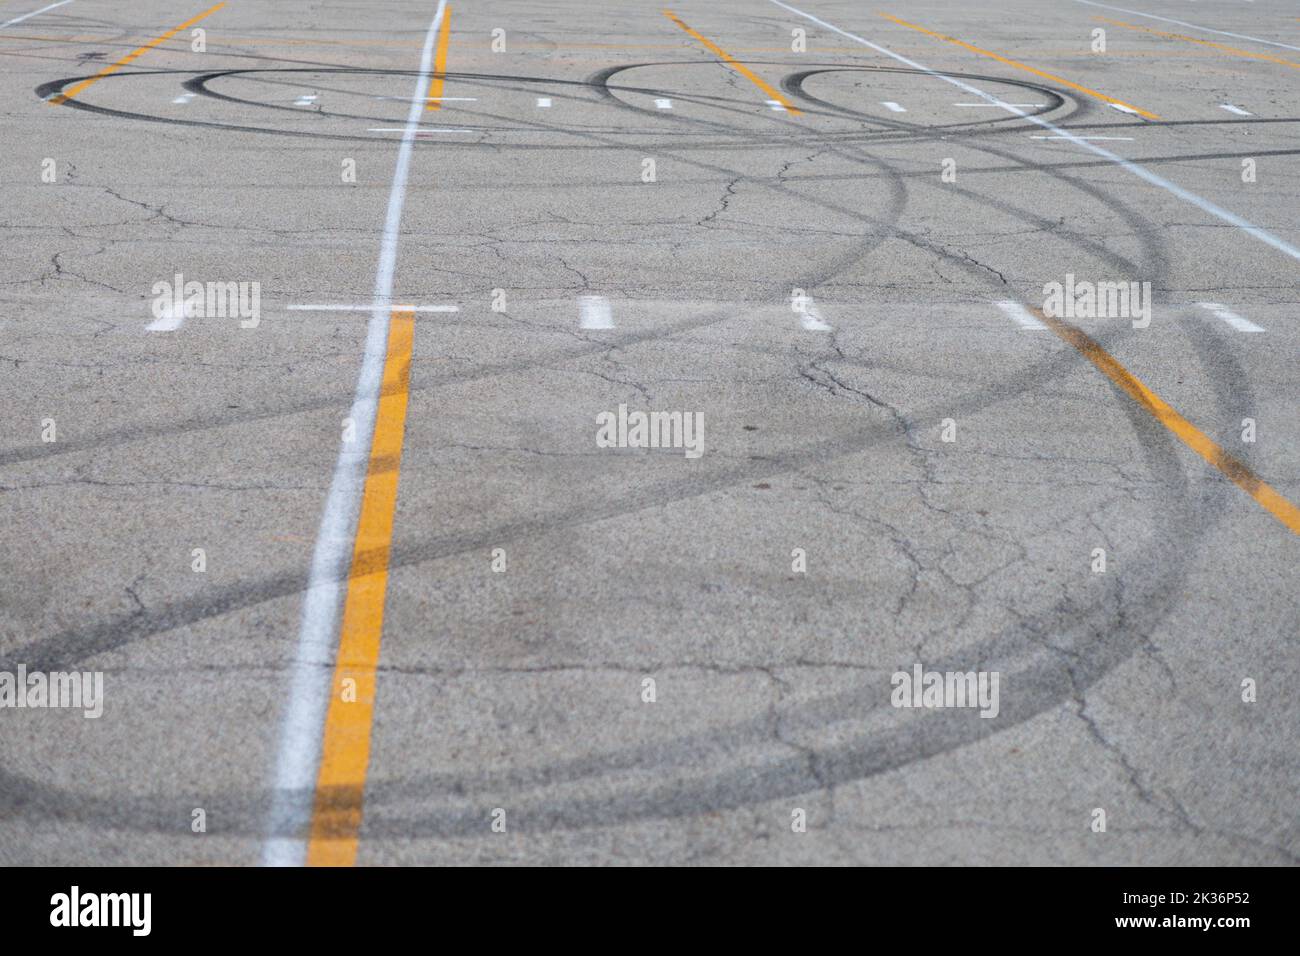 looping car tracks in the middle of a parking lot Stock Photo